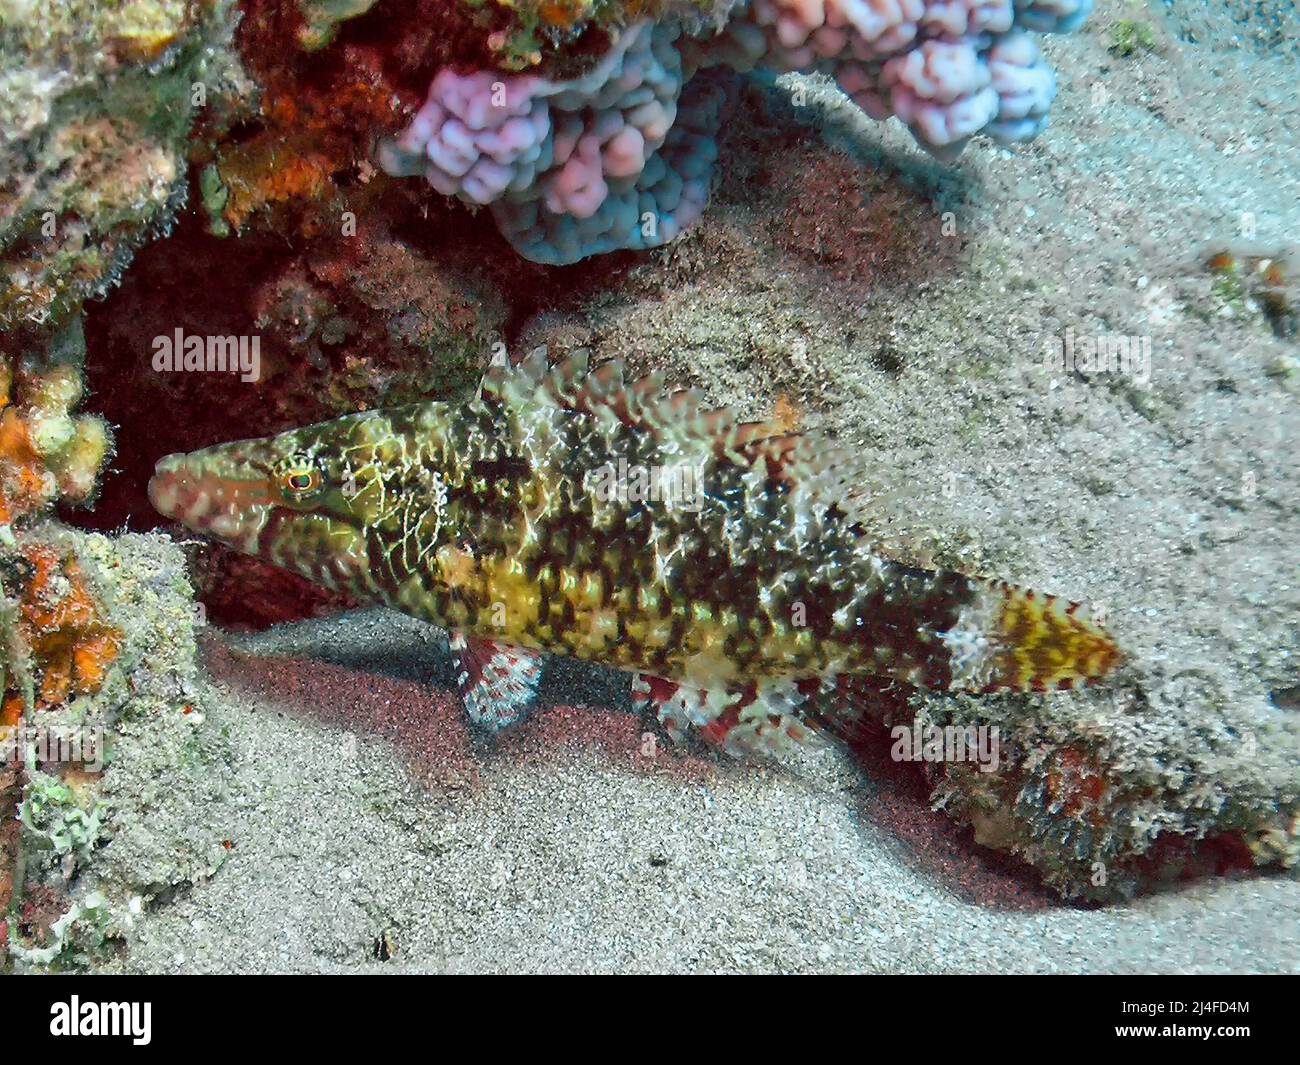 A Mental Wrasse (Oxycheilinus mentalis) in the Red Sea, Egypt Stock Photo